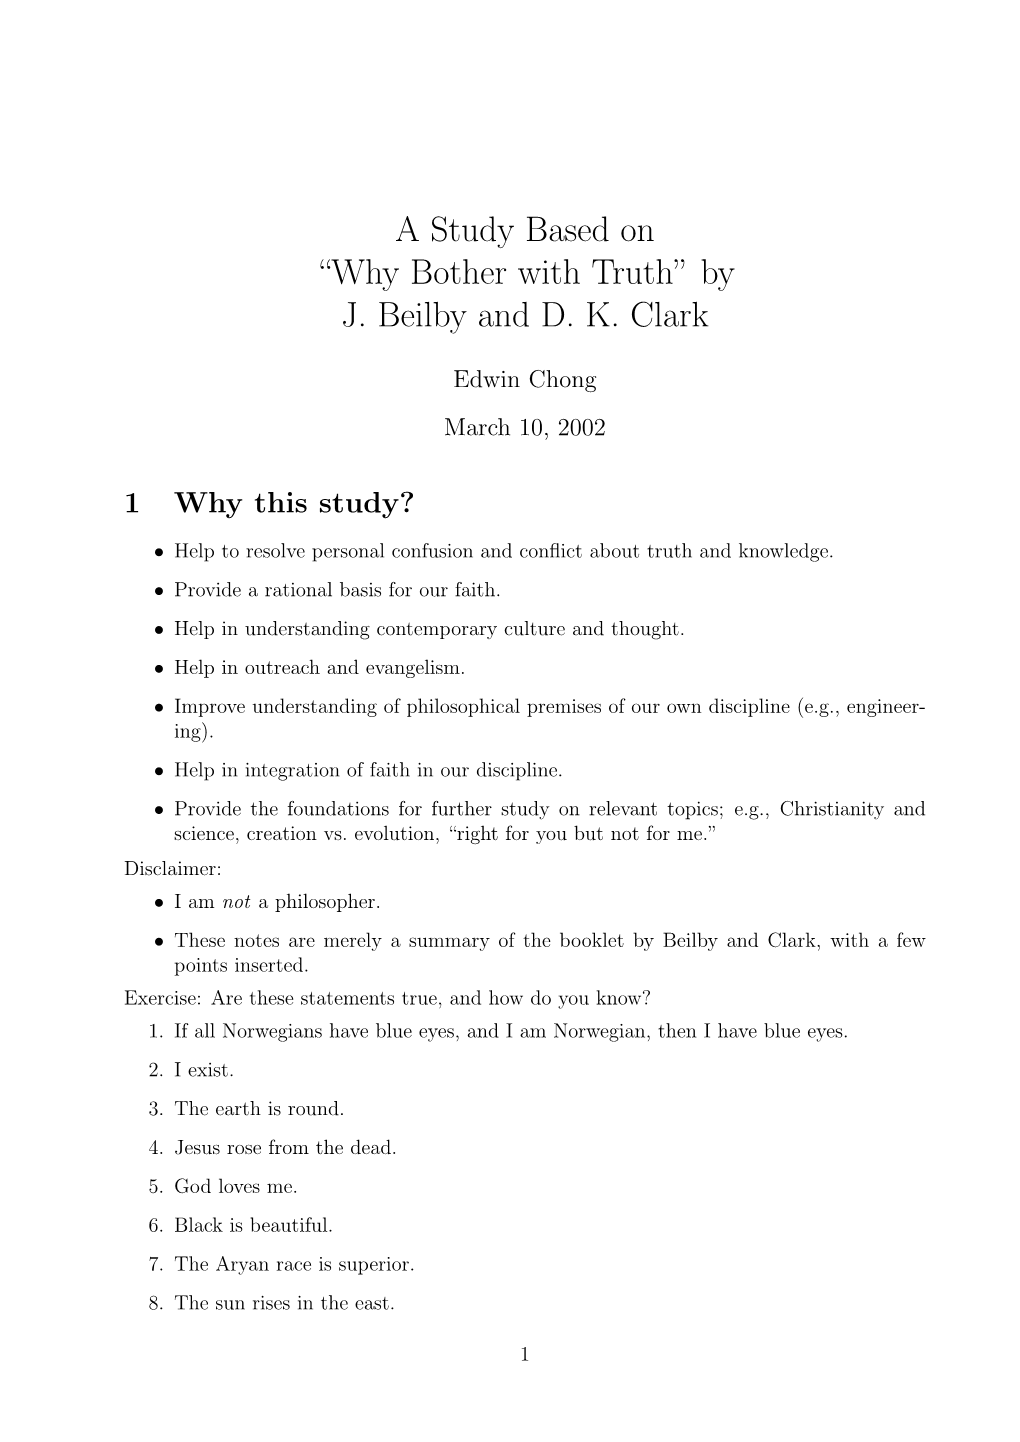 A Study Based on “Why Bother with Truth” by J. Beilby and D. K. Clark